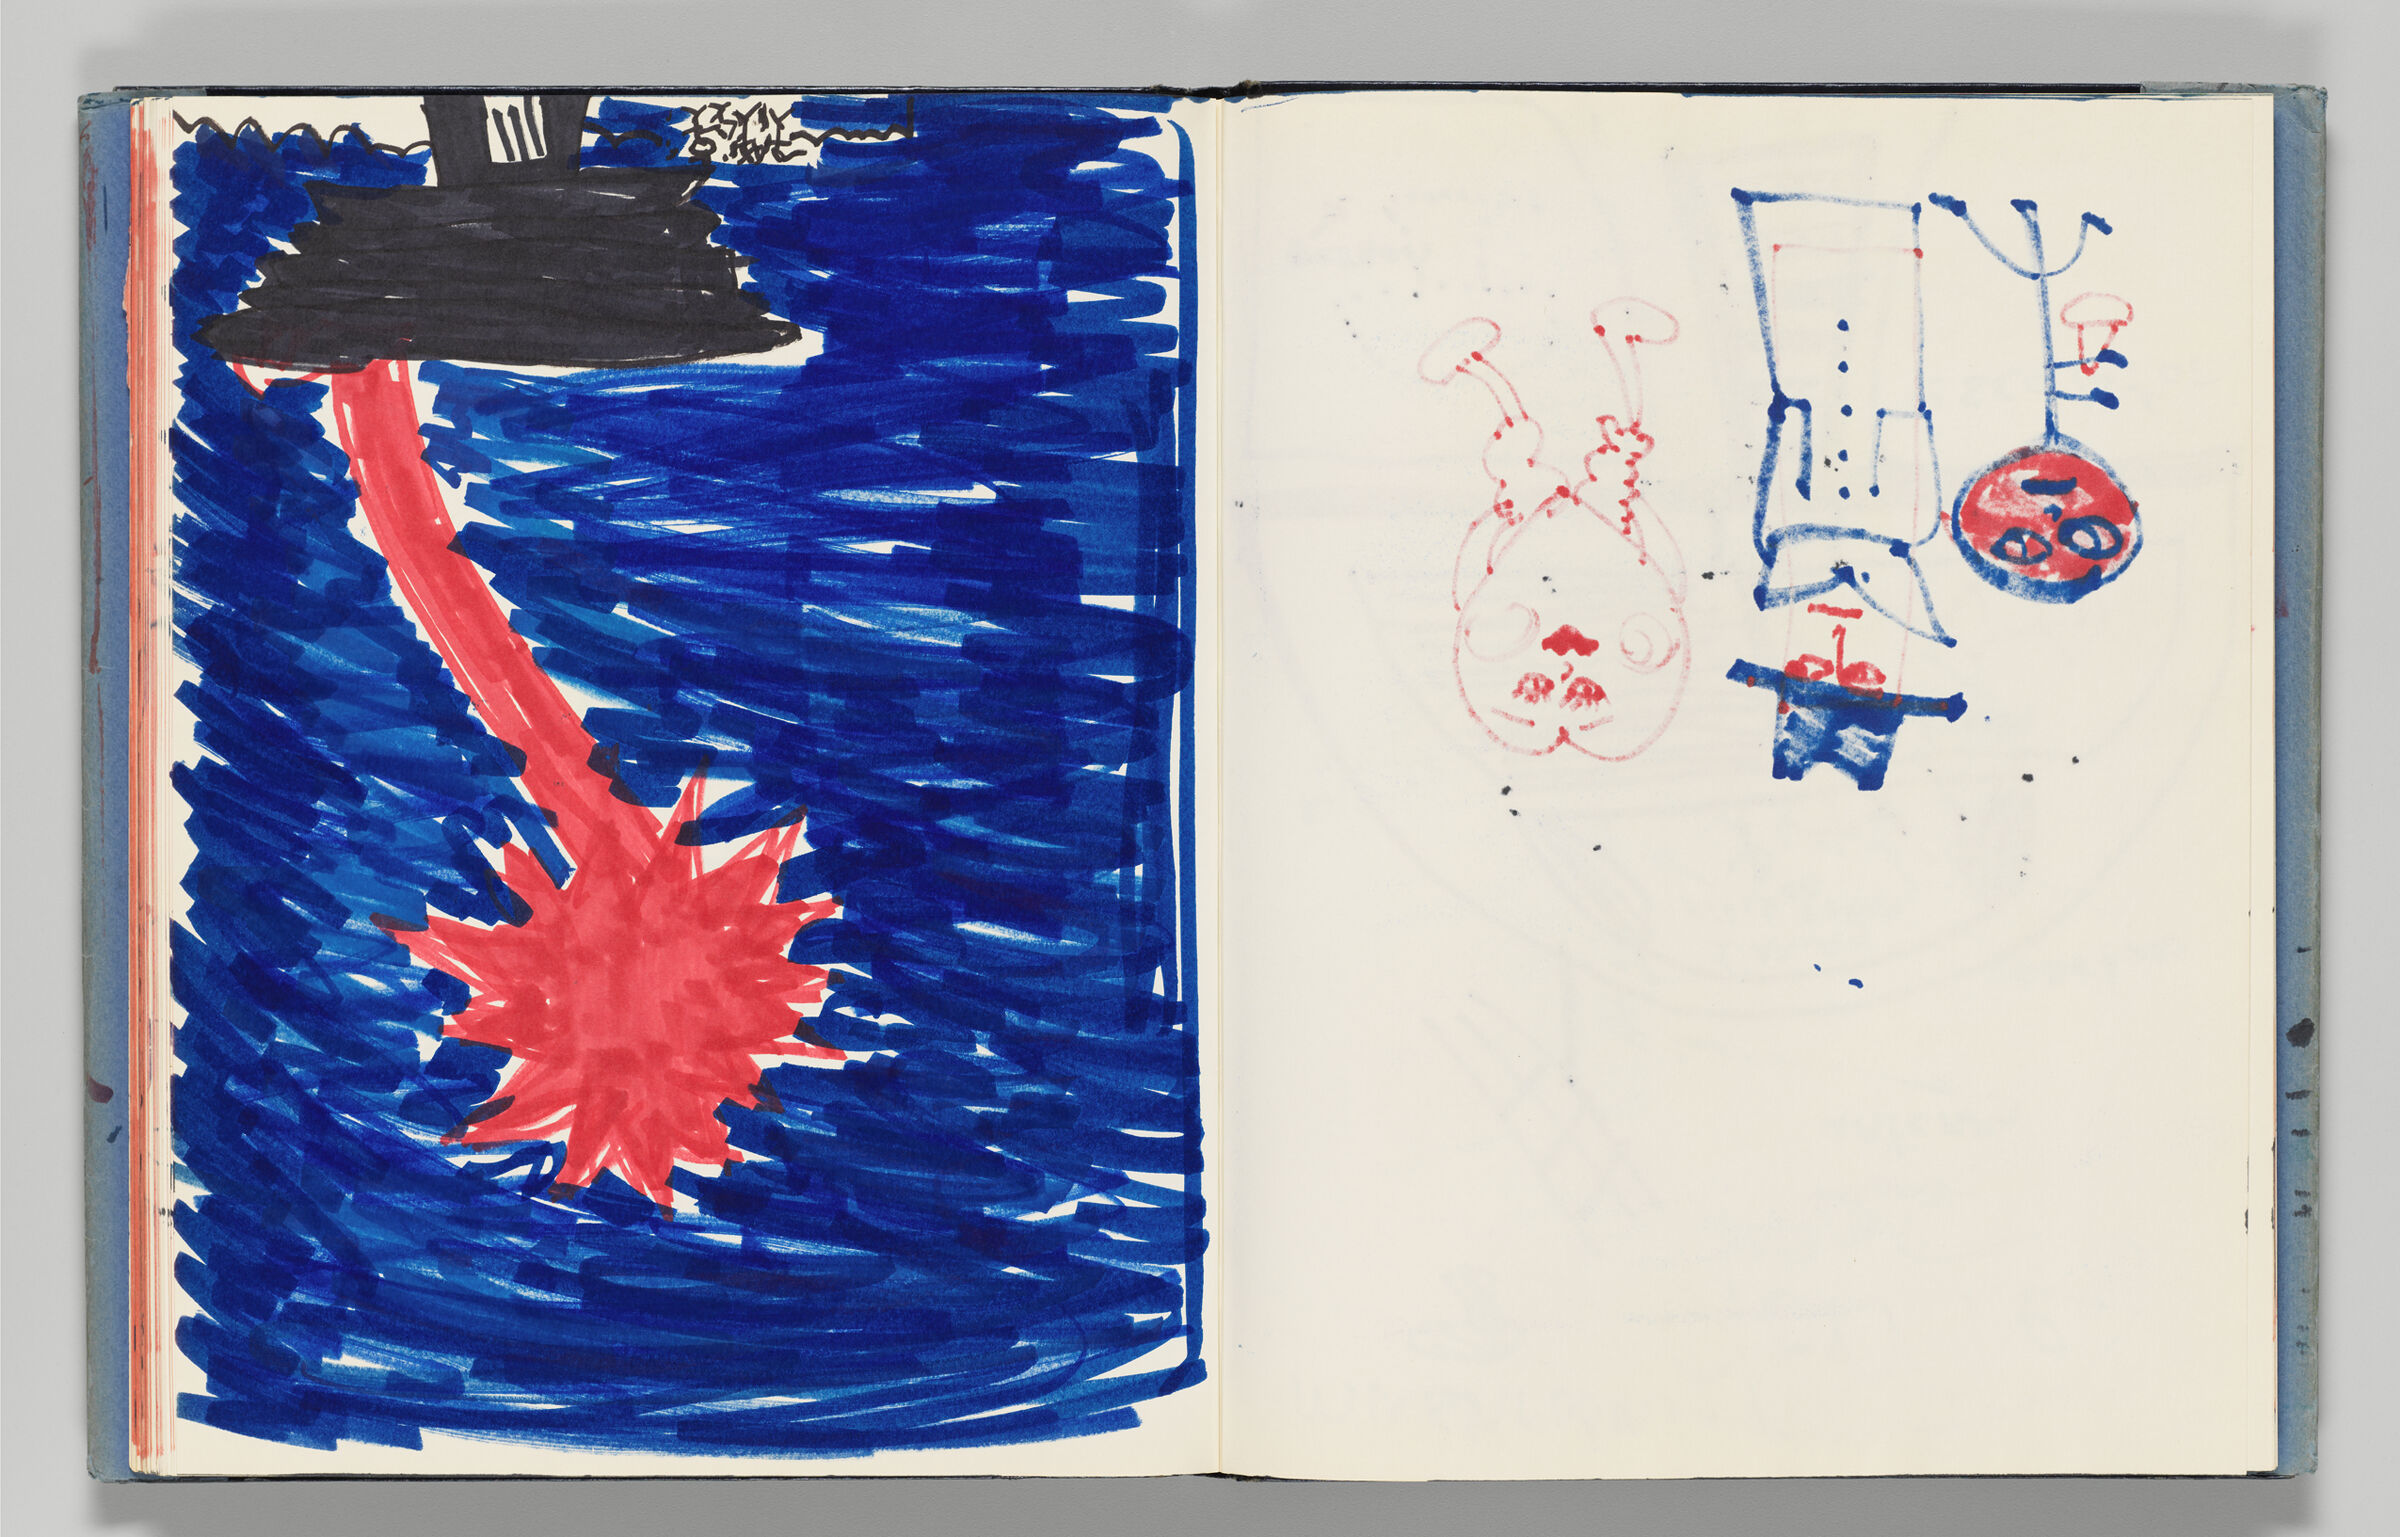 Untitled (Sketch Of Red Inflatable By Artist's Daughter, Left Page); Untitled (Bleed-Through, Right Page)